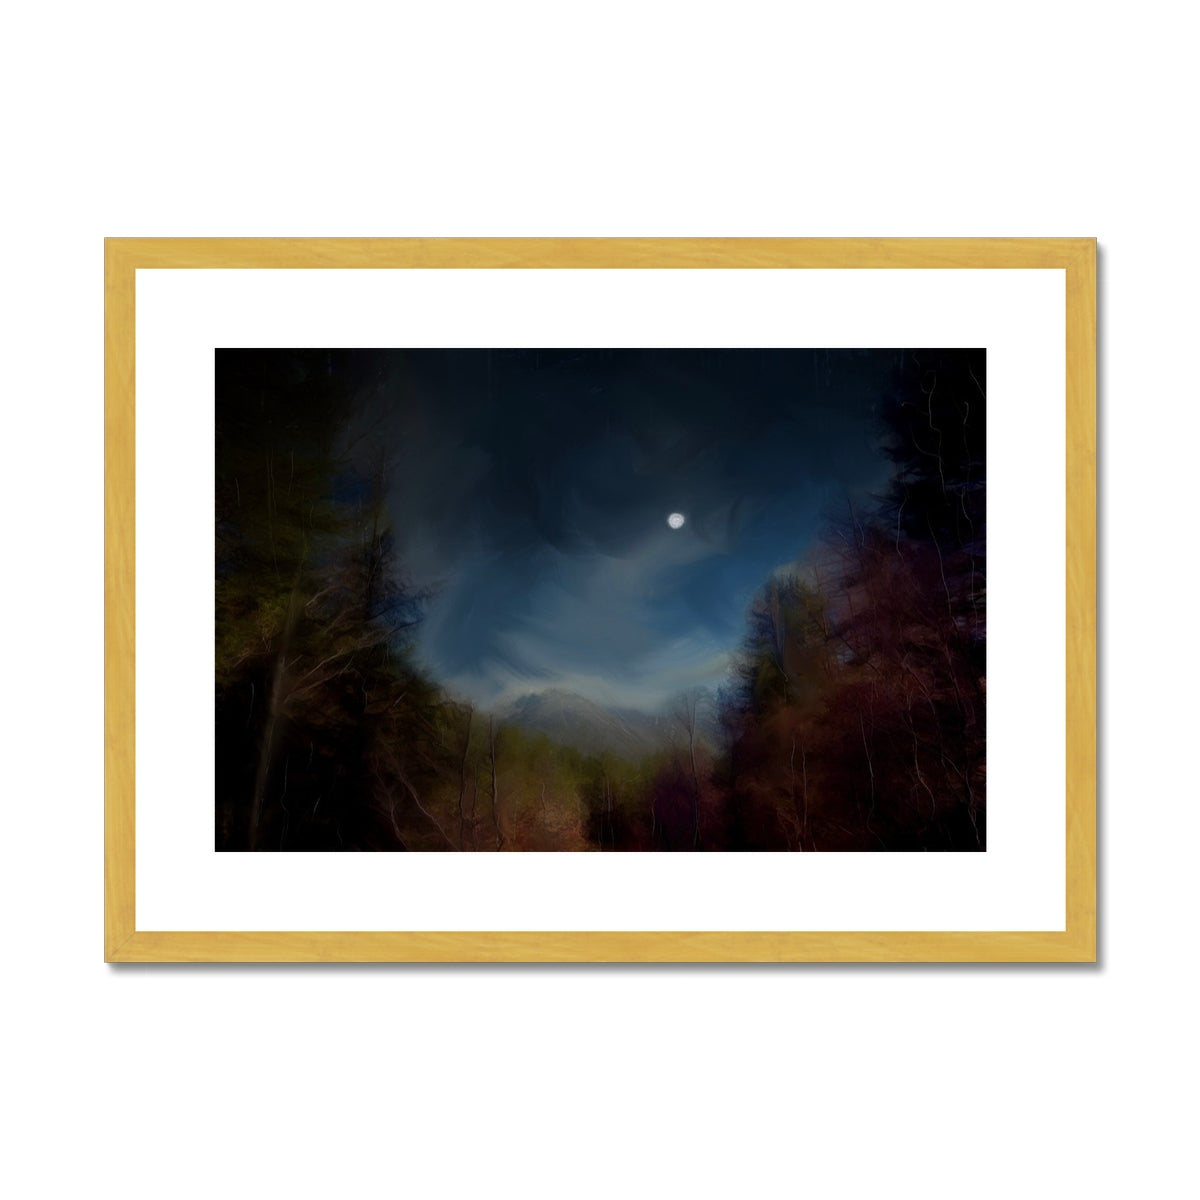 Glencoe Lochan Moonlight Painting | Antique Framed & Mounted Prints From Scotland-Antique Framed & Mounted Prints-Scottish Lochs & Mountains Art Gallery-A2 Landscape-Gold Frame-Paintings, Prints, Homeware, Art Gifts From Scotland By Scottish Artist Kevin Hunter